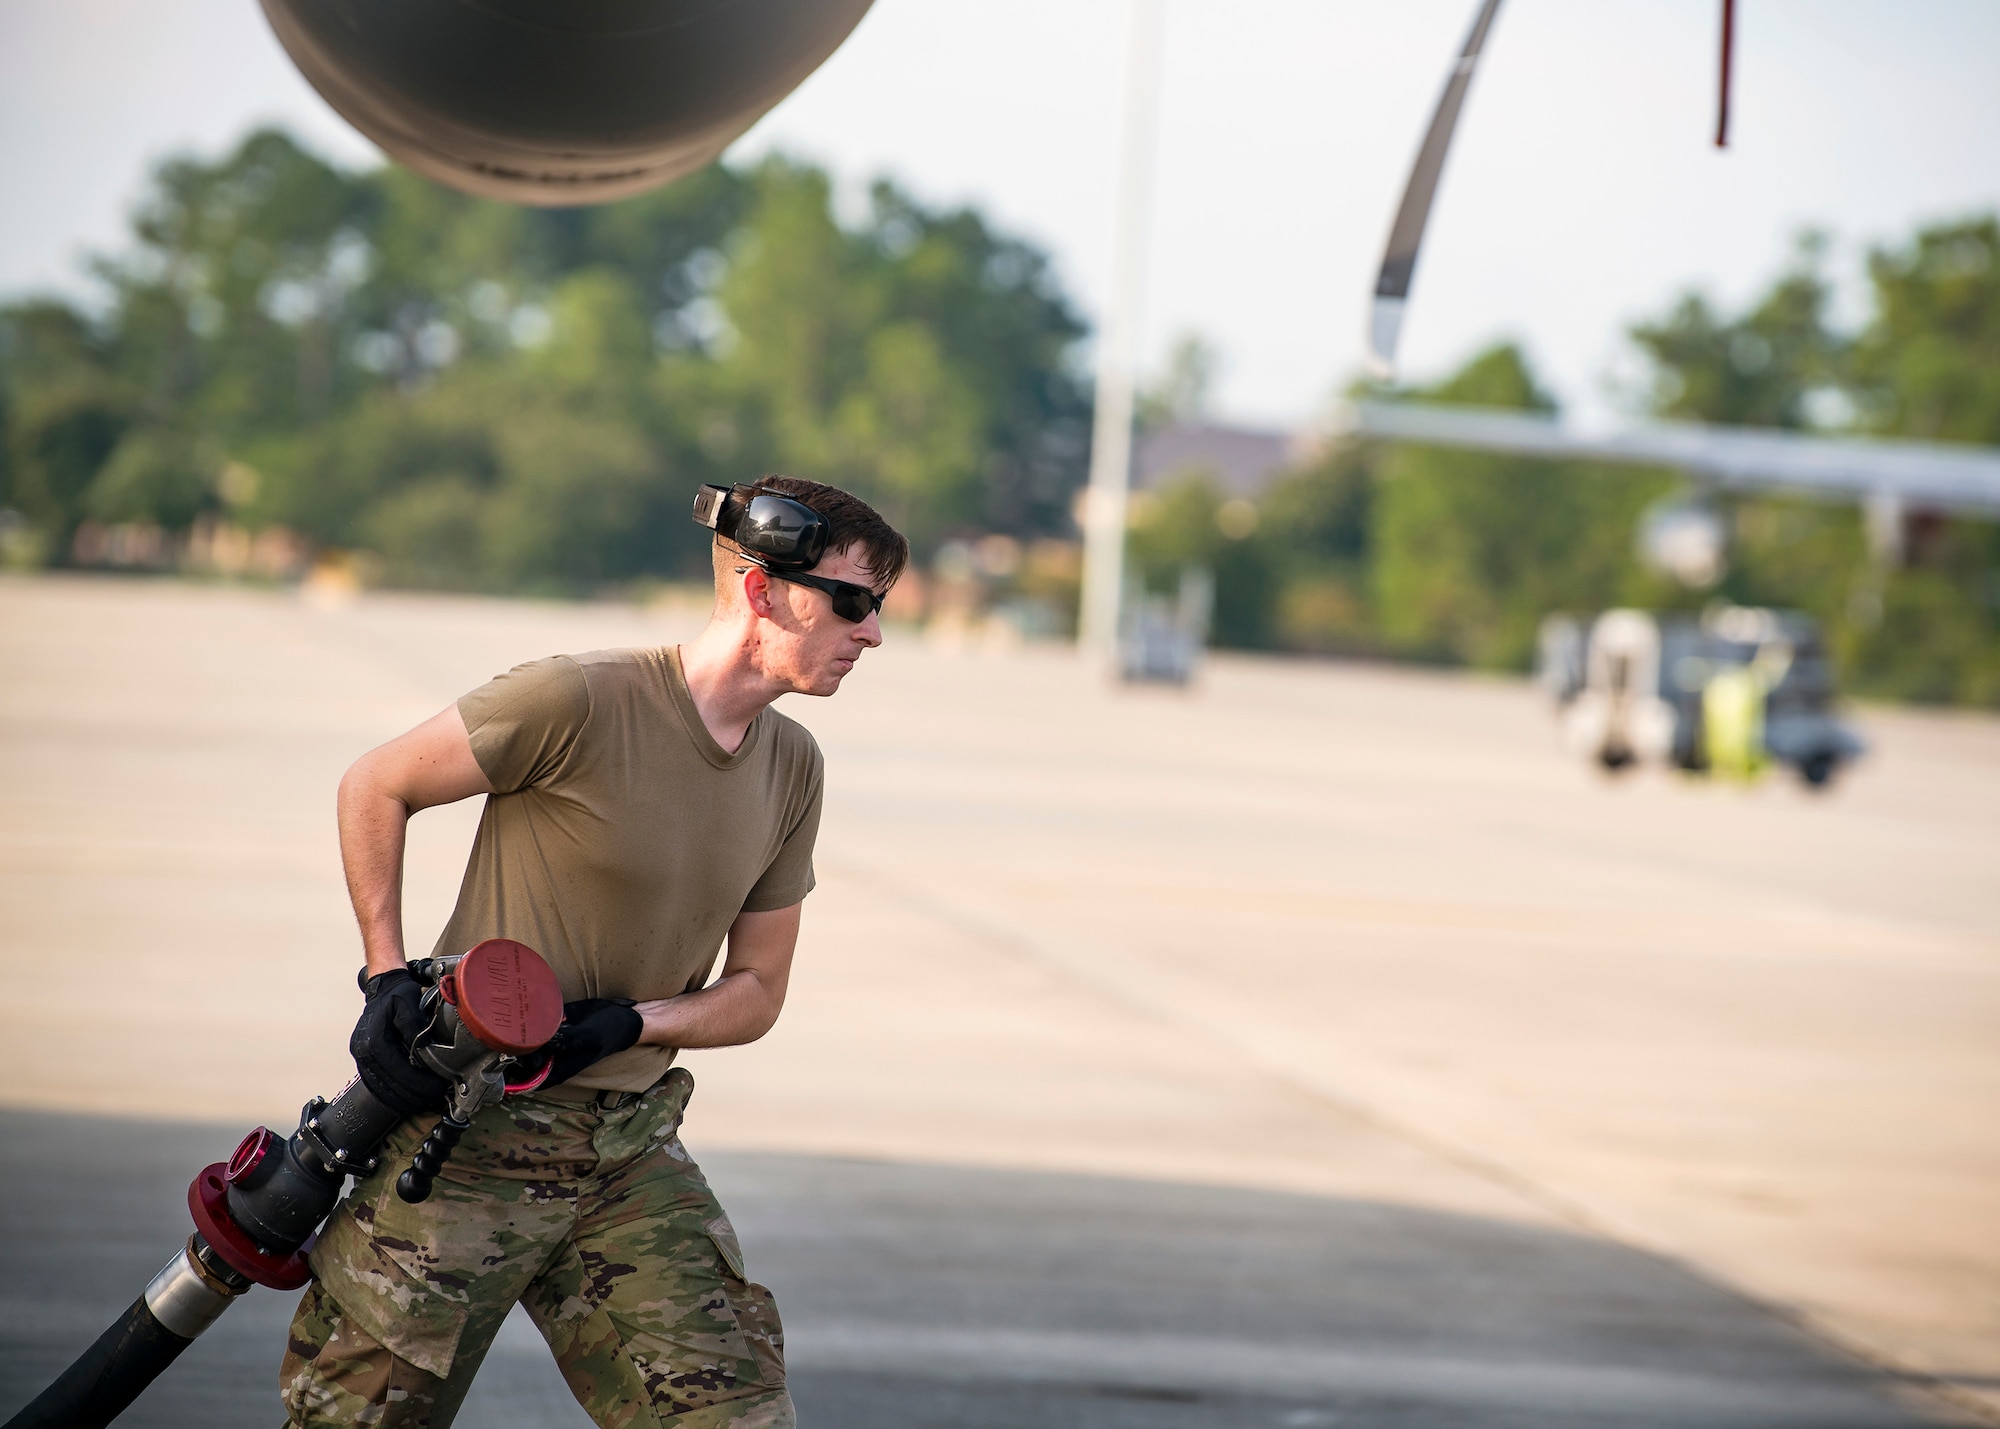 Airman 1st Class Steven Raulston, 23d Logistics Readiness Squadron fuels distribution operator, carries a fuel line hose, Aug. 13, 2019, at Moody Air Force Base, Ga.  Airmen from the 71st Aircraft Maintenance Unit and other supporting units perform various tasks prior to takeoff to ensure the aircraft is performing optimally to complete its mission of supporting the 71st Rescue Squadron. Those tasks consist of: pre-flight inspection, removing plugs and cover, fueling the aircraft, repairing any problems found during crew pre-flight checks as well as marshaling the aircraft for takeoff. (U.S. Air Force photo by Airman 1st Class Eugene Oliver)